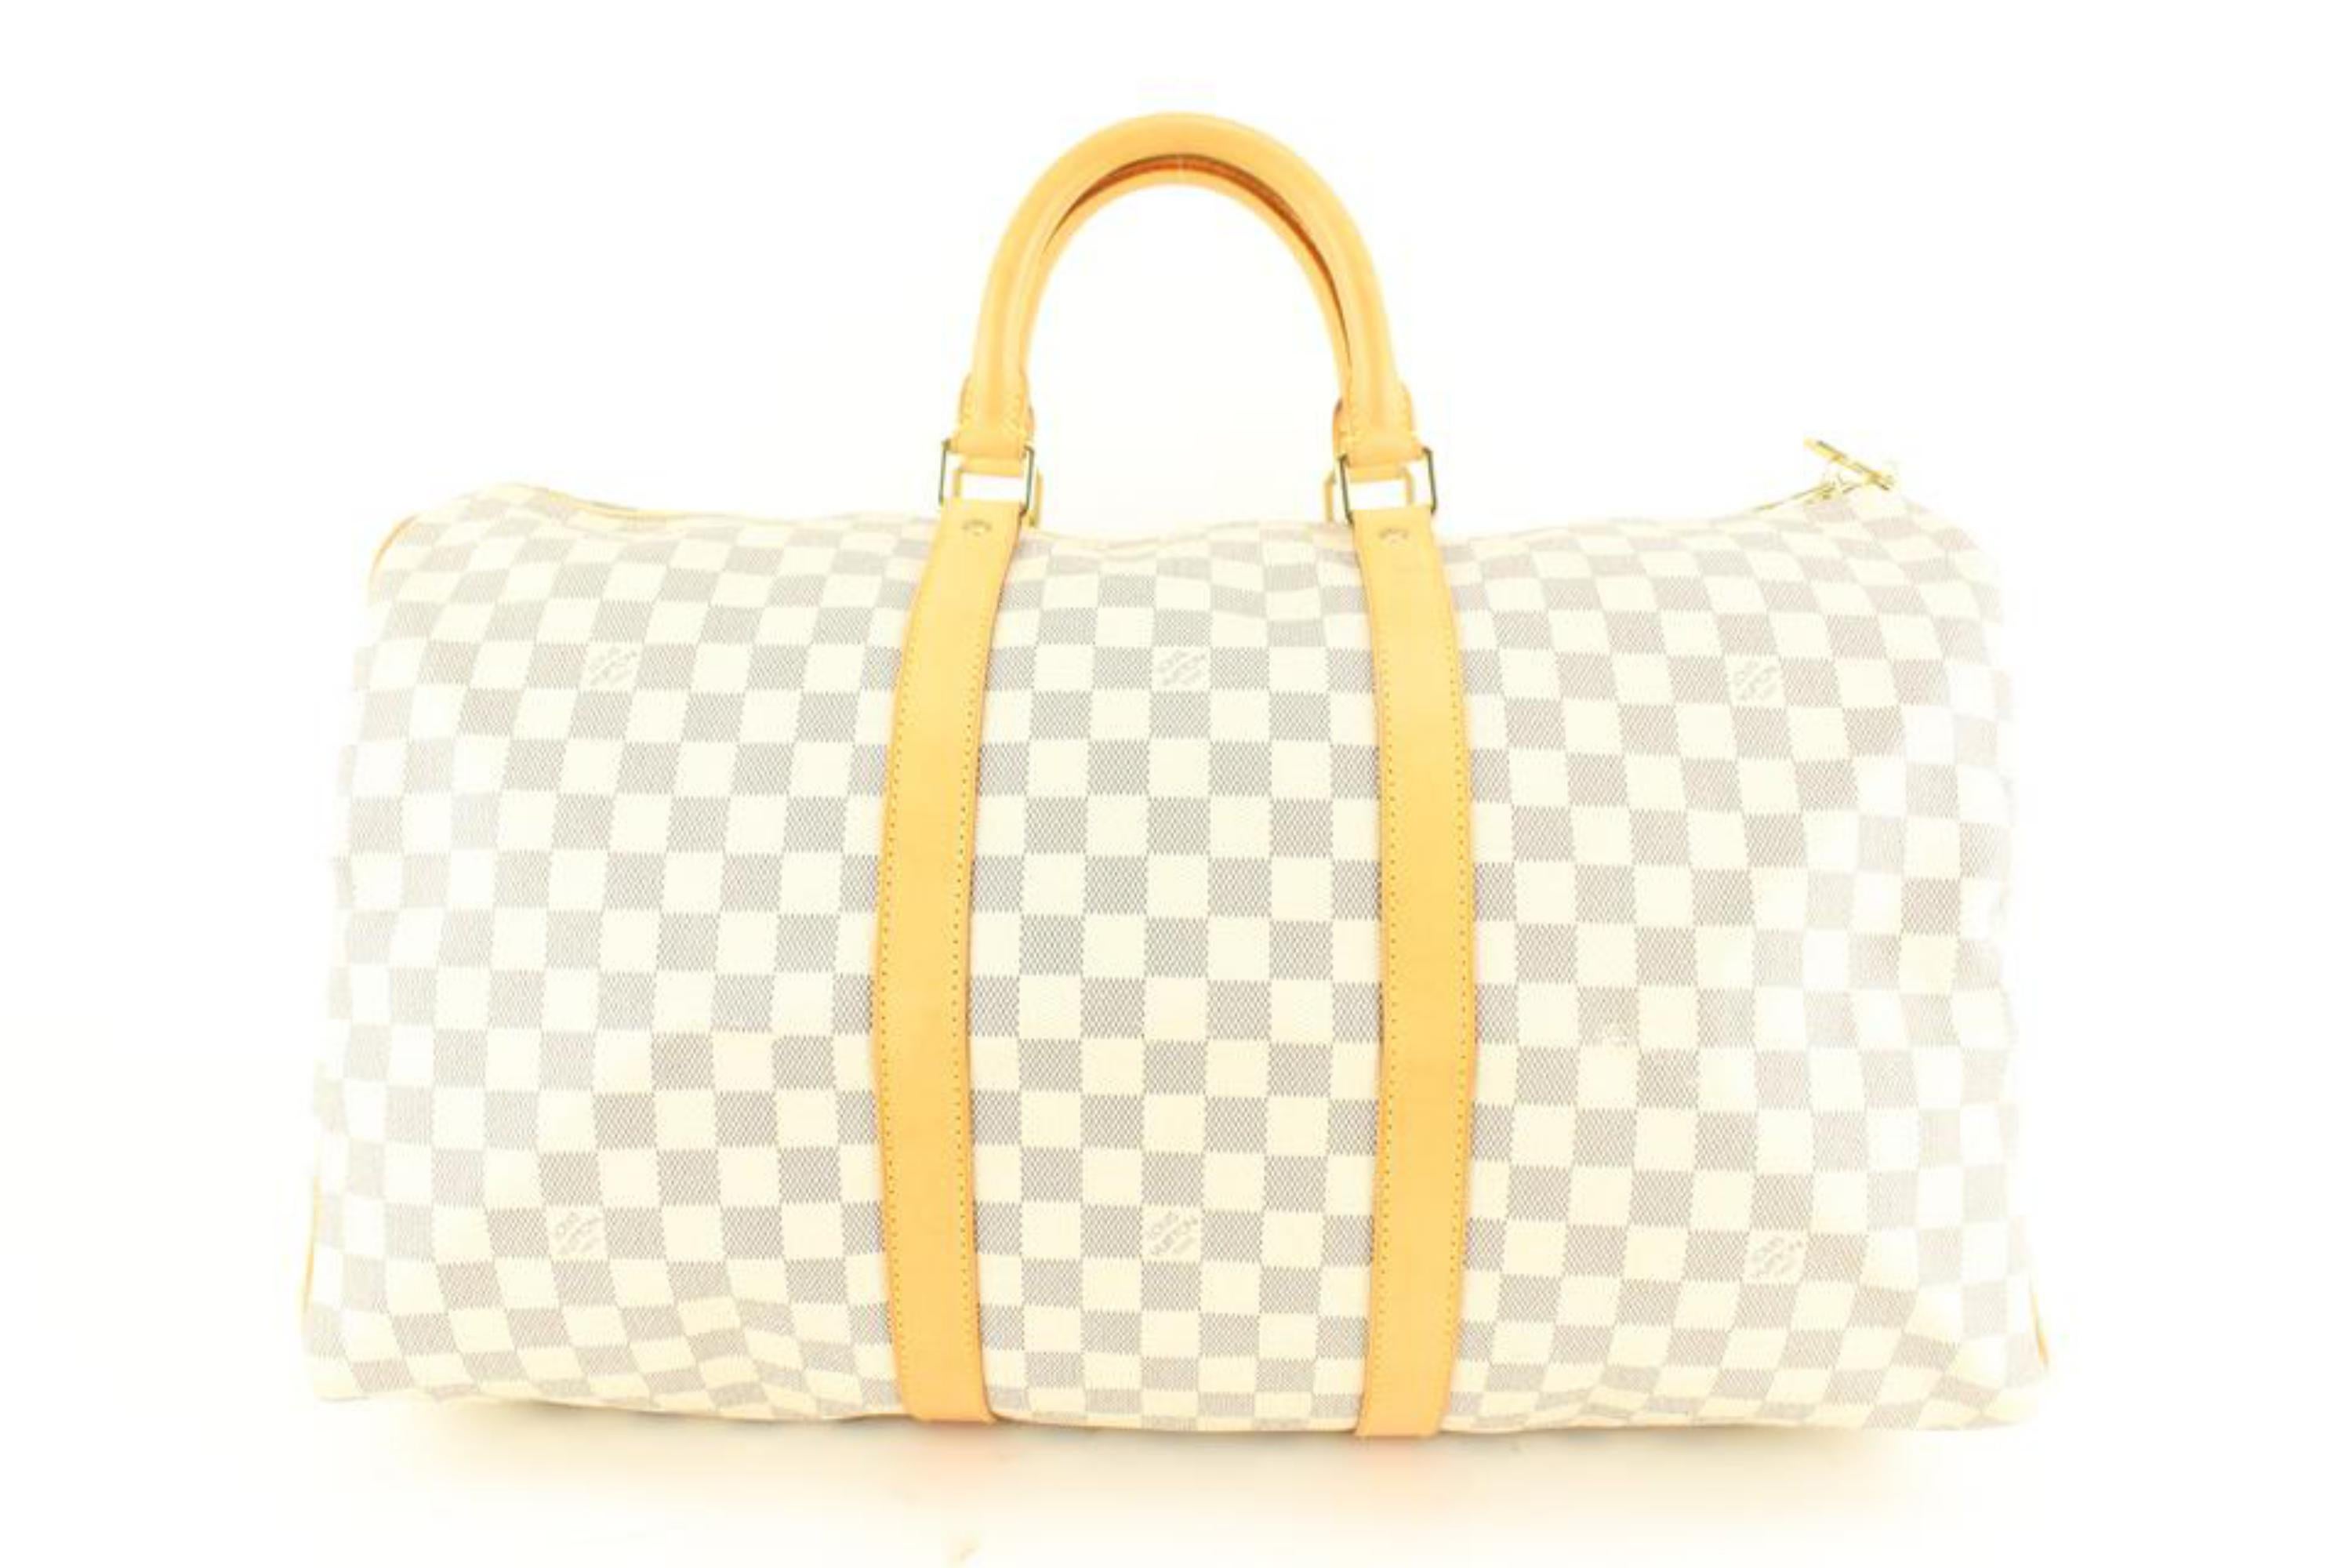 Louis Vuitton Damier Azur Keepall 50 Duffle Bag 15lk616s In Excellent Condition For Sale In Dix hills, NY